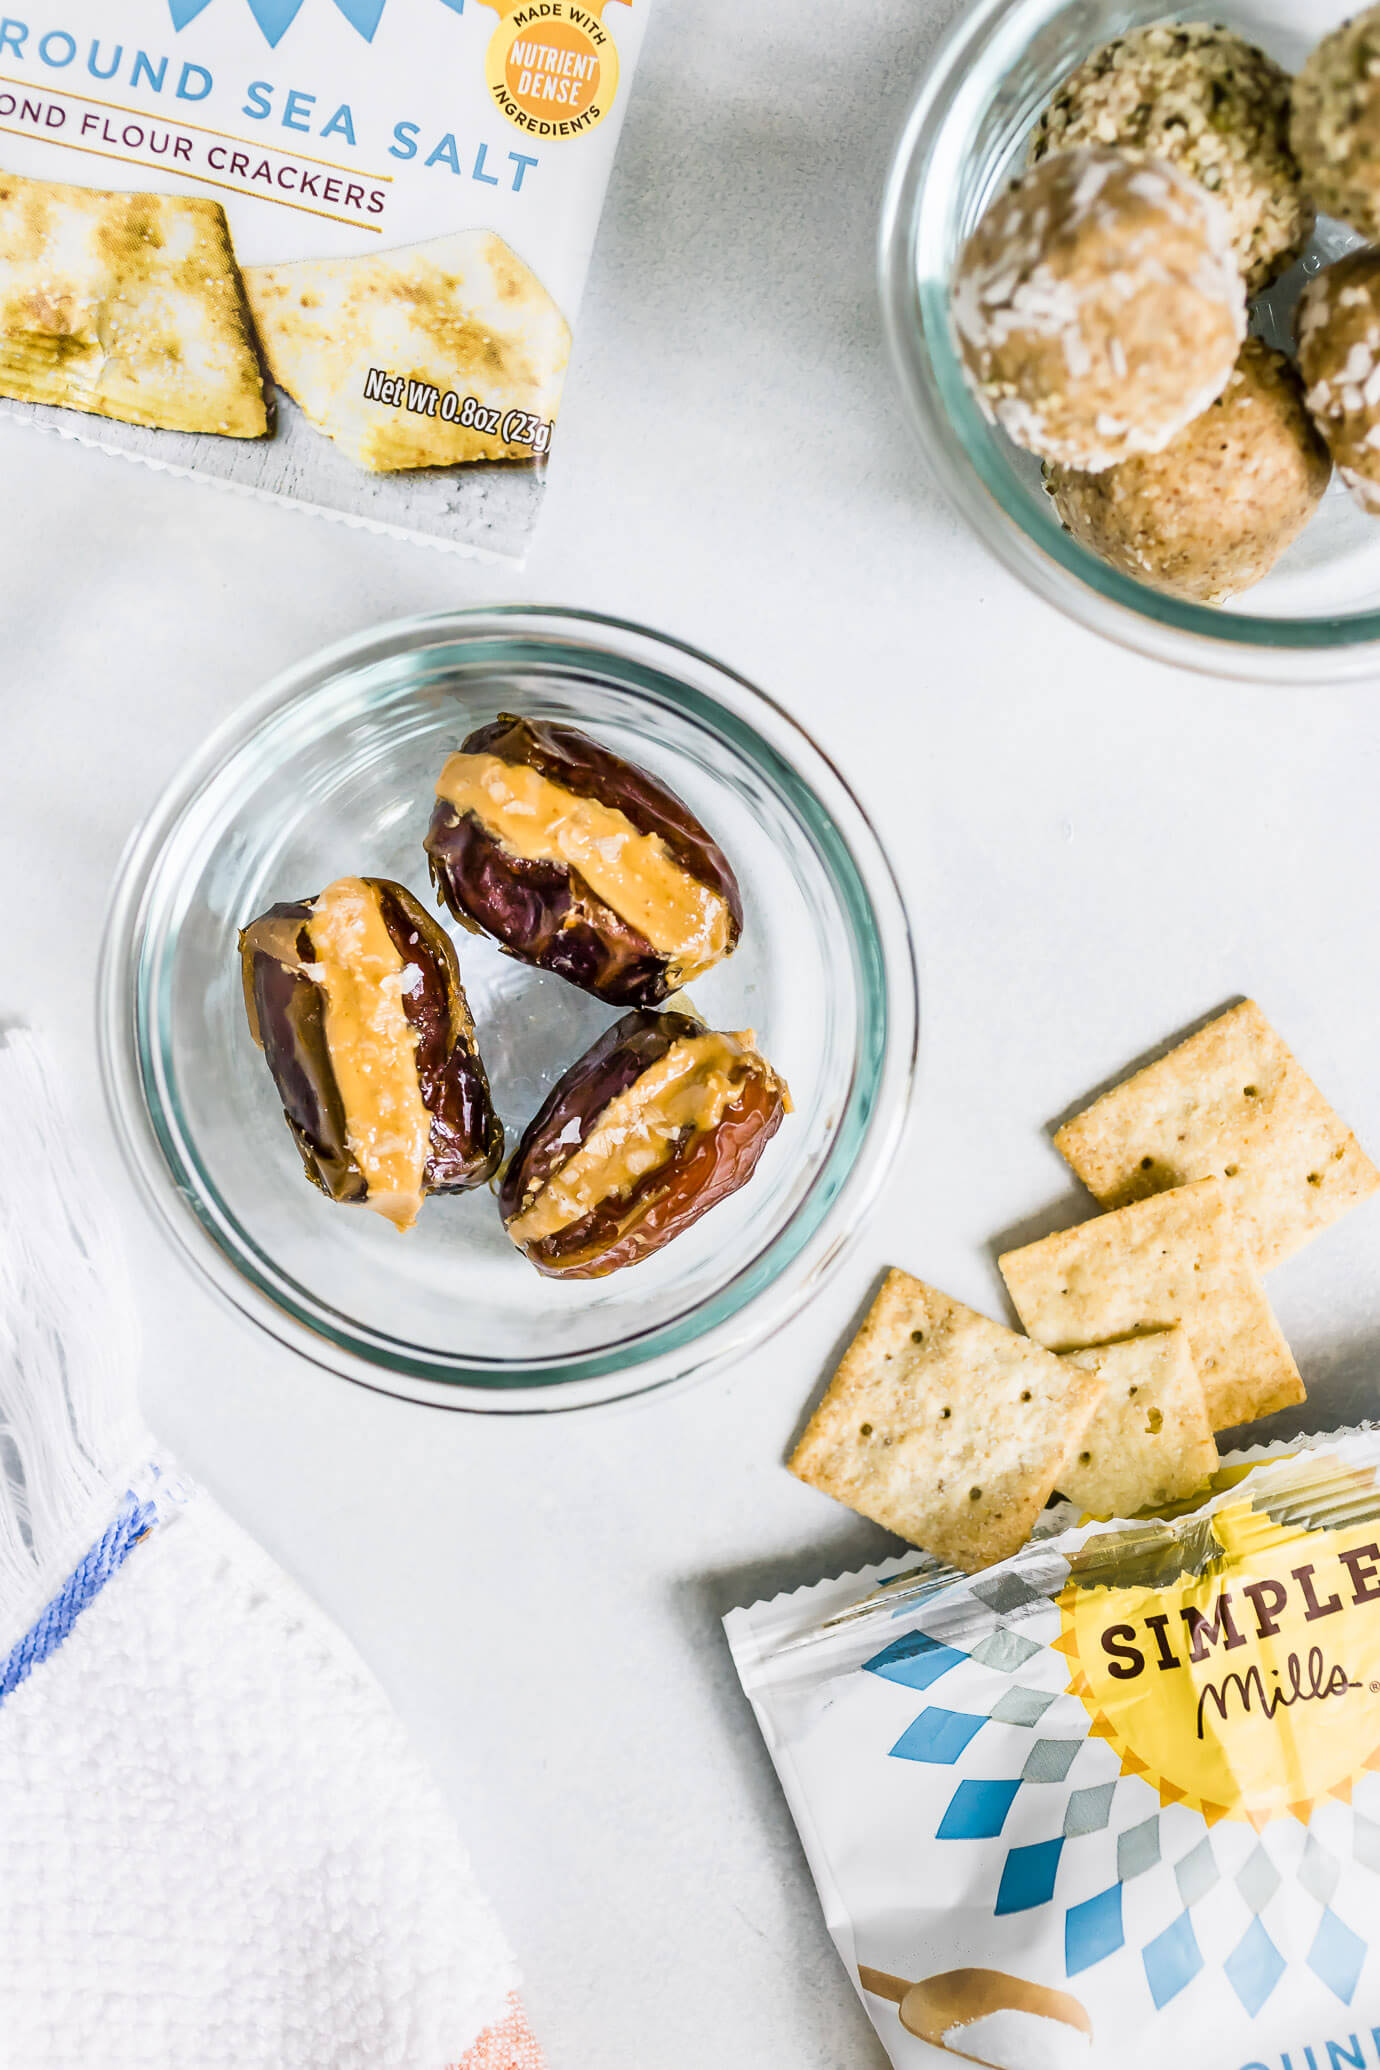 5 Simple Healthy Snacks for Summer featuring Simple Mills Almond Flour Crackers, peanut butter stuffed dates and cashew coconut snack bites